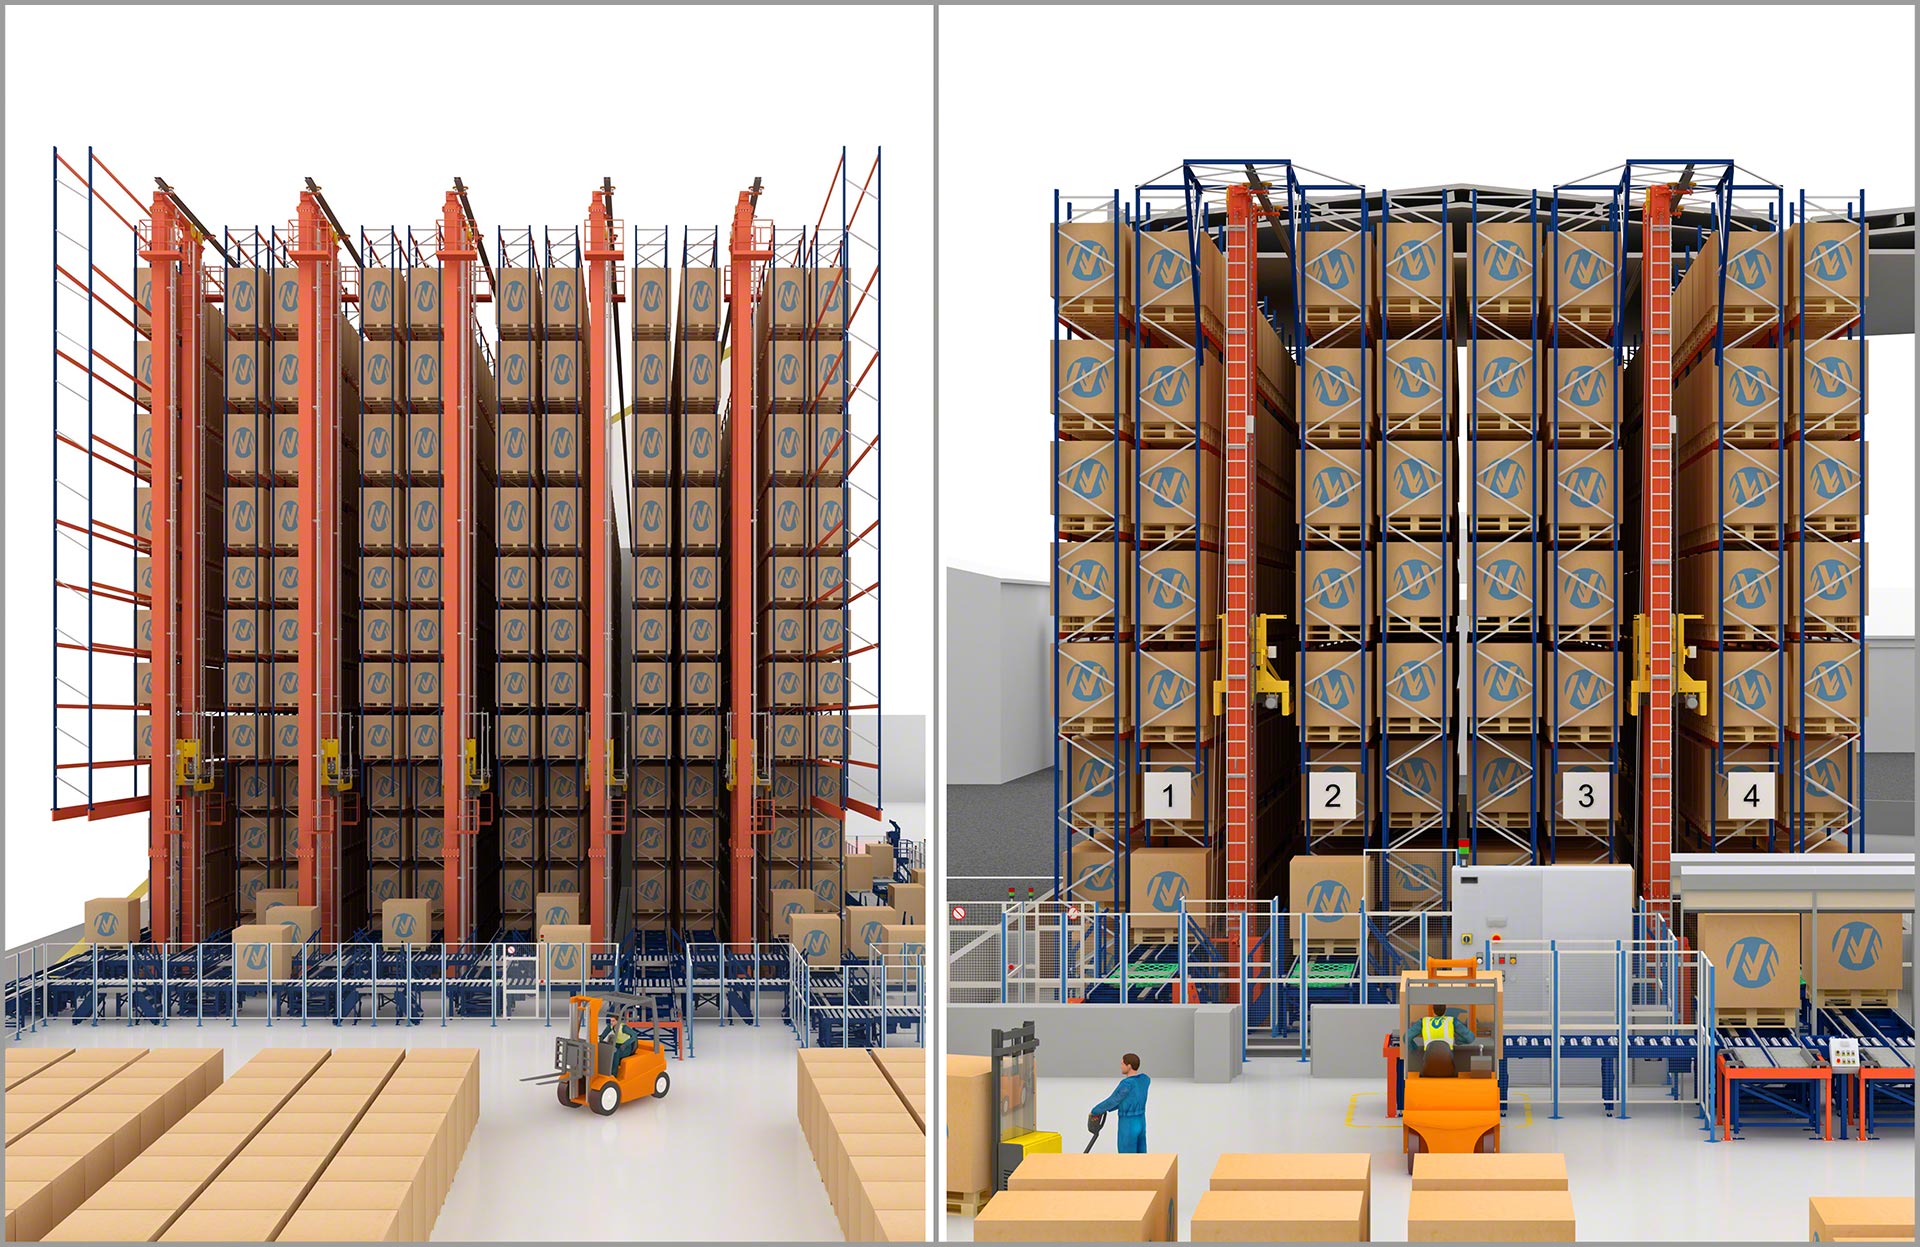 Stacker cranes can operate with single- and double-deep pallet racking